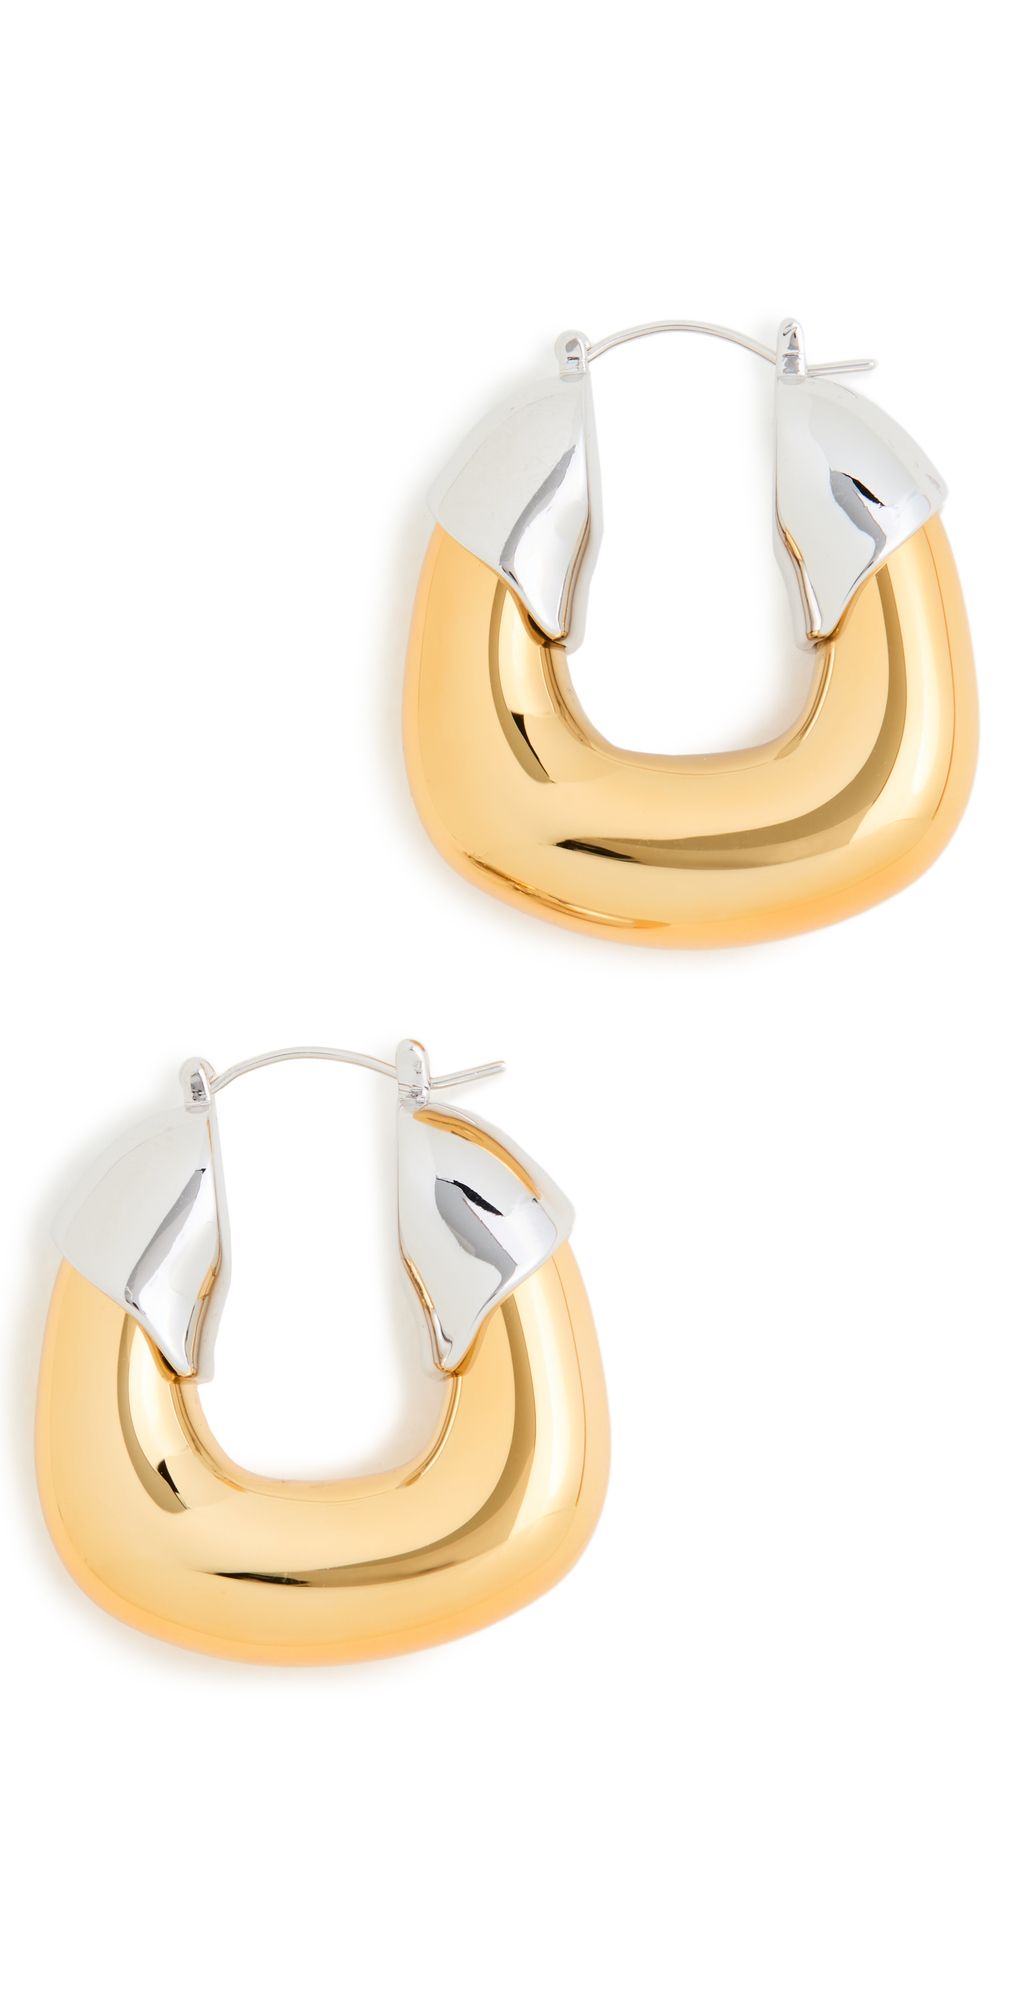 Lizzie Fortunato Hoops In Mixed Metal | Shopbop